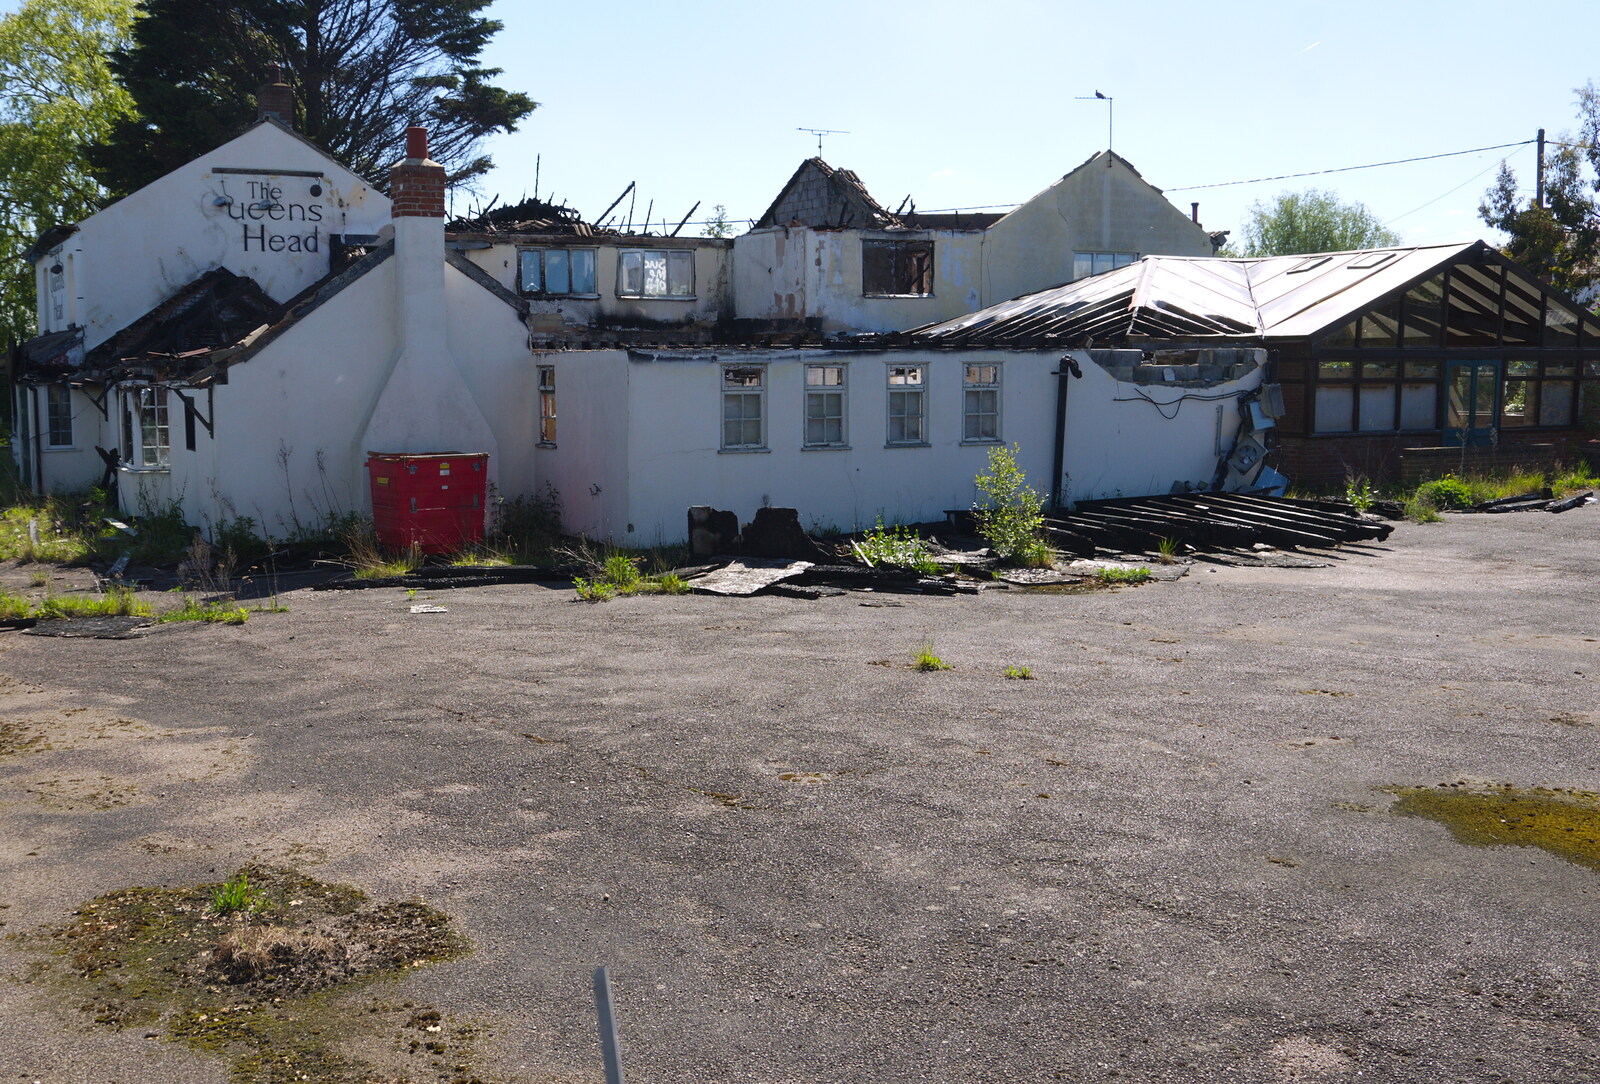 The pub has been almost completely razed to the ground from The BSCC Bike Ride 2019, Coggeshall, Essex - 11th May 2019